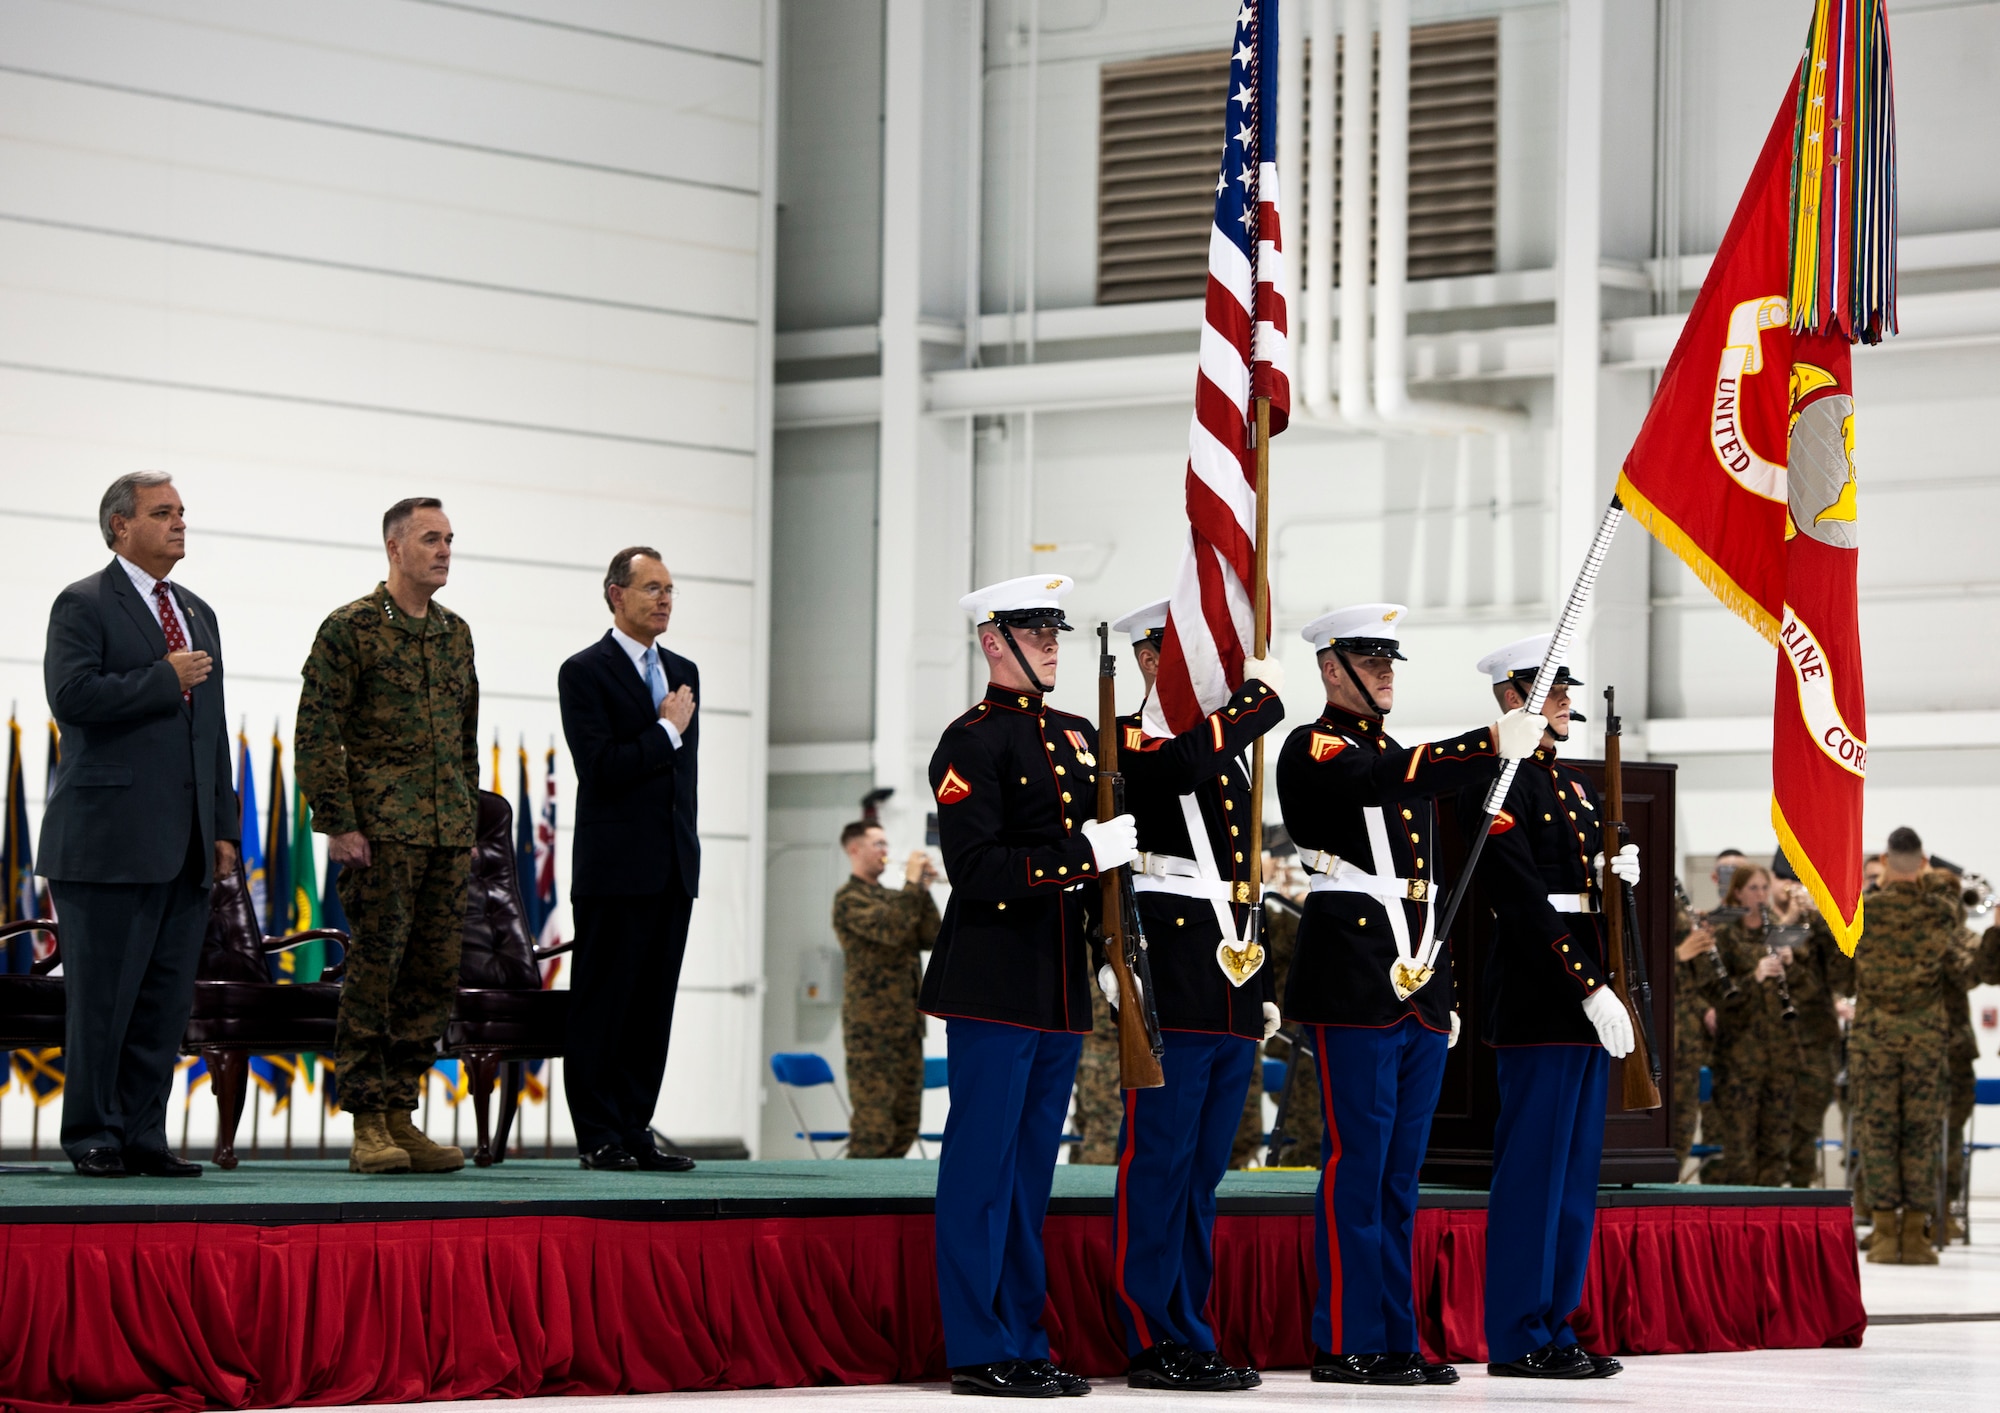 U.S. Congressman Jeff Miller, Assistant Commandant of the Marine Corps. Gen. Joseph Dunford and Chairman and CEO of Lockheed Martin Robert Stevens watch as Marine color guard present the colors during the national anthem at the F-35B Lightning II roll out ceremony Feb. 24 at Eglin Air Force Base, Fla.  (U.S. Air Force photo/Samuel King Jr.)